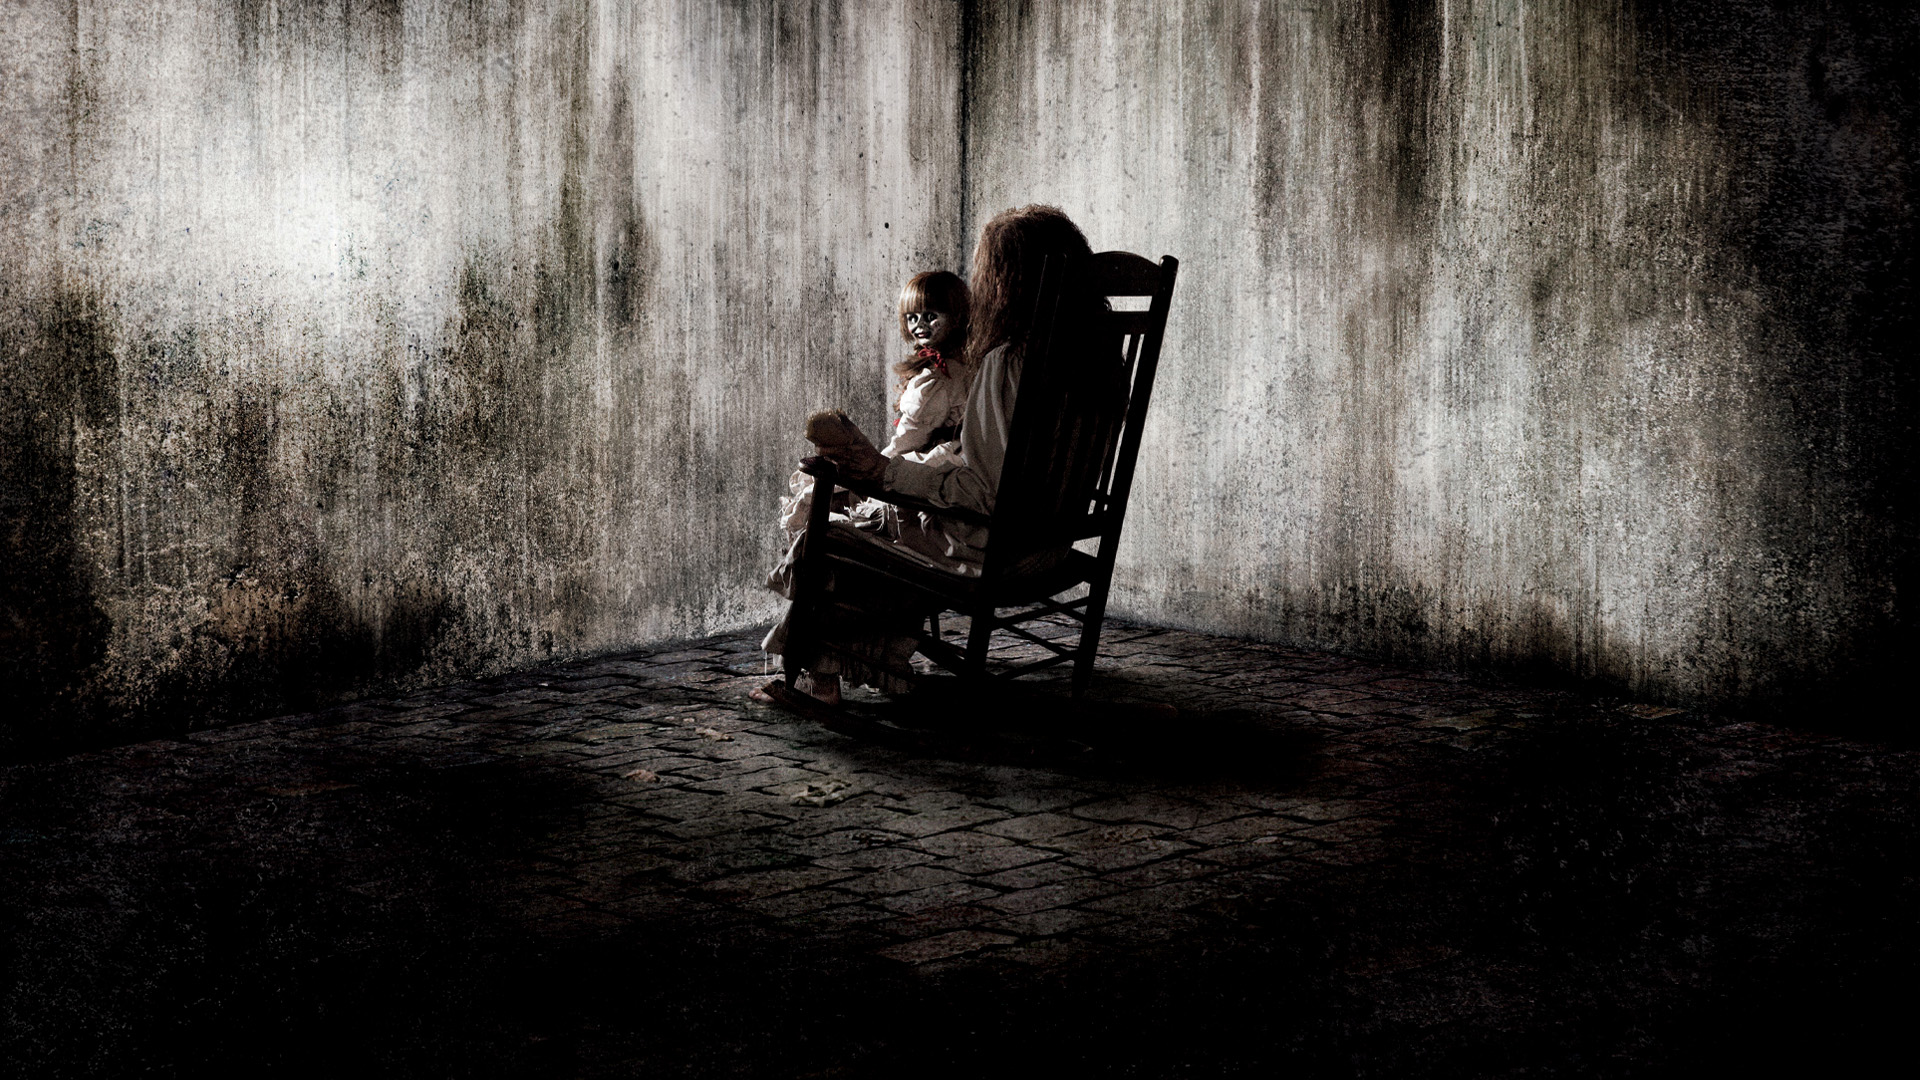 Movie The Conjuring HD Wallpaper | Background Image